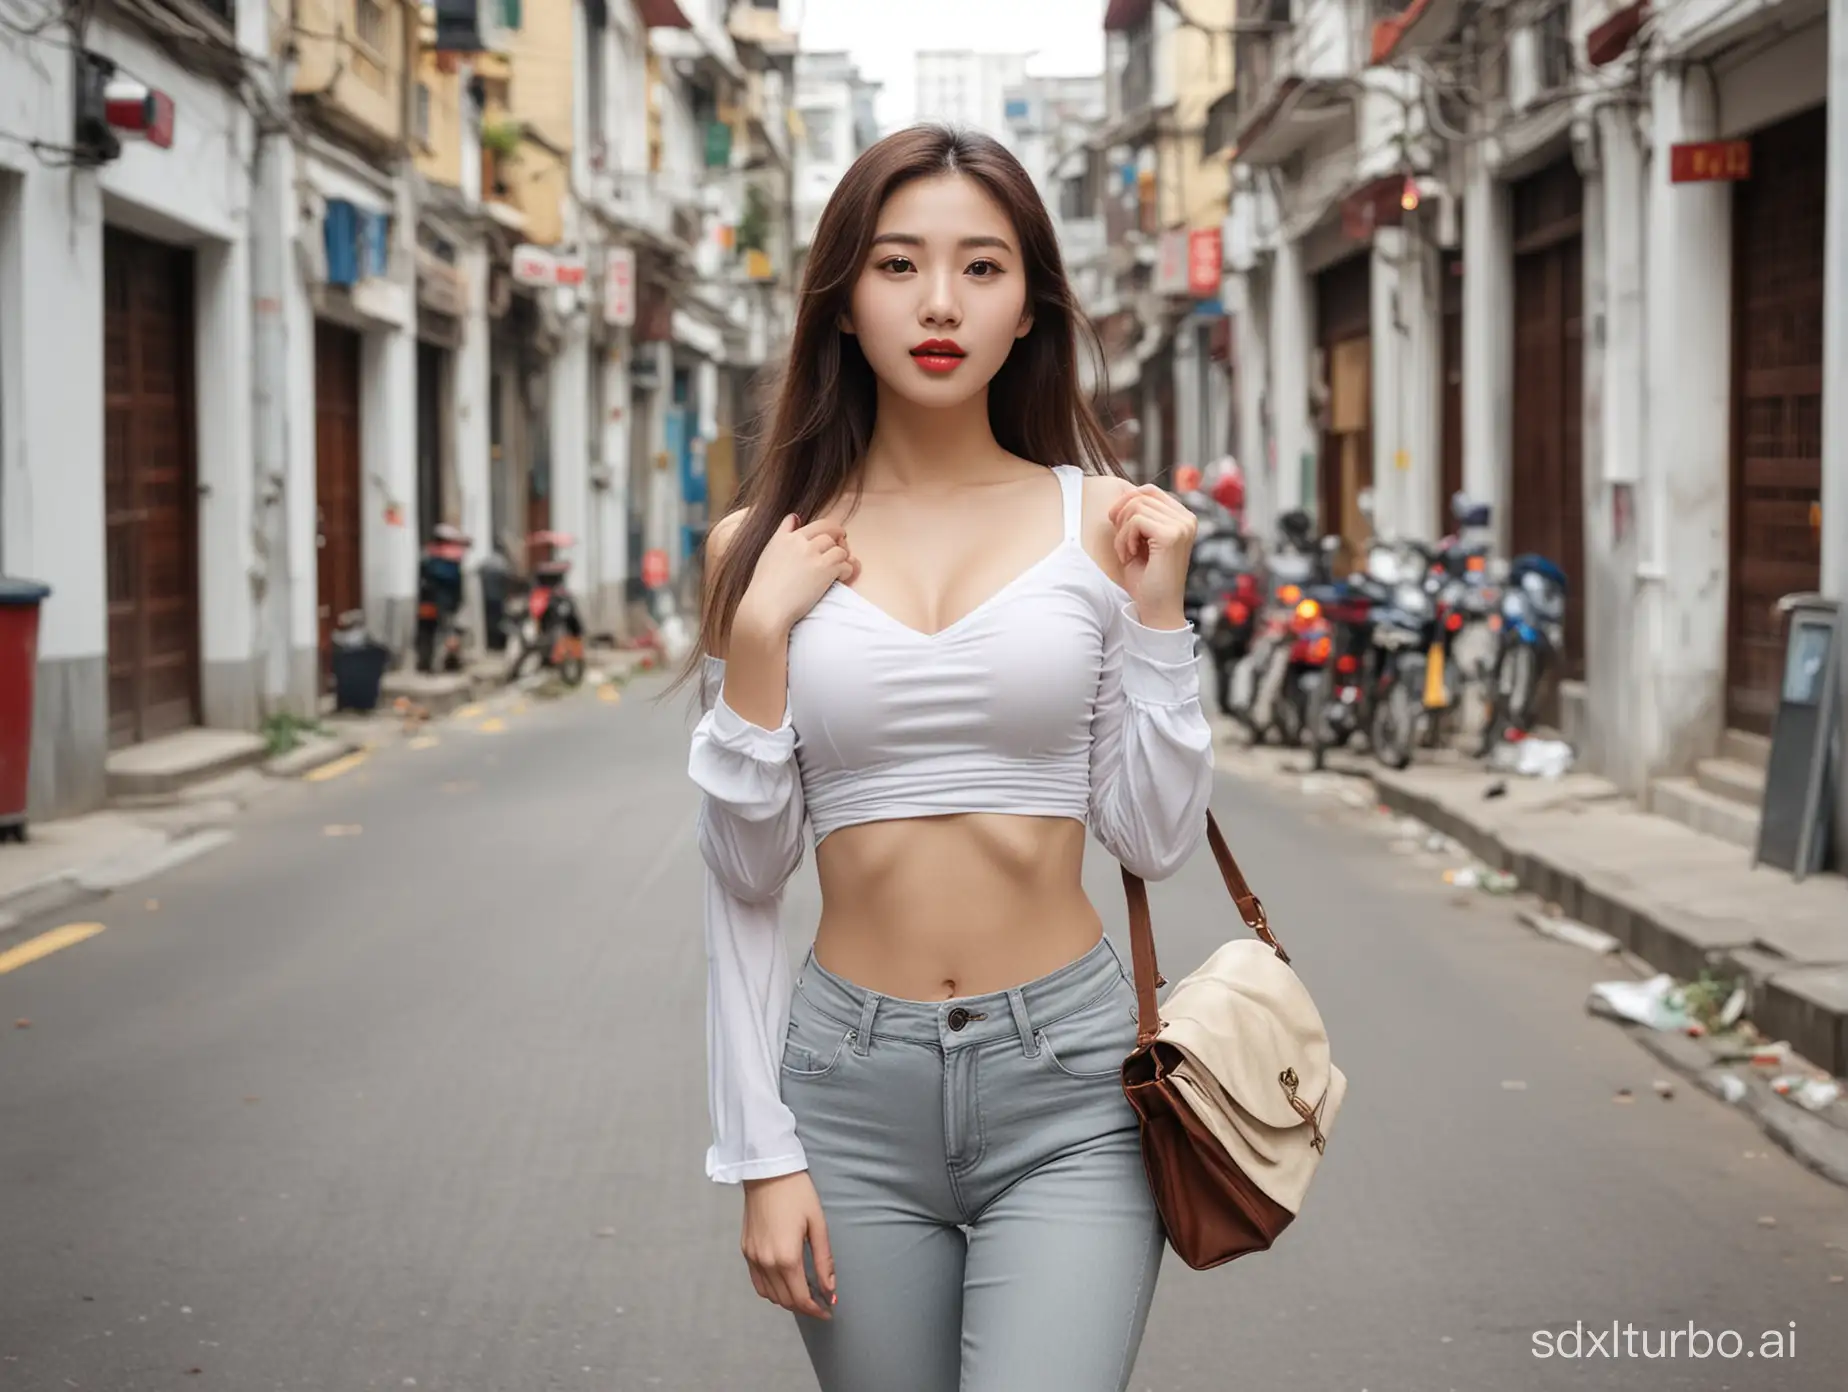 The Chinese girl, 18 years old, Quan Zhixian, red lips, slender figure, sexy, well-developed chest, plump, beautiful like a fairy, long flowing hair, white shirt, yoga pants, protruding above and curving below, cleavage, left hand carrying a bag, right hand on the hip, standing sideways on the street gazing affectionately at the camera, full-body shot, masterpiece.